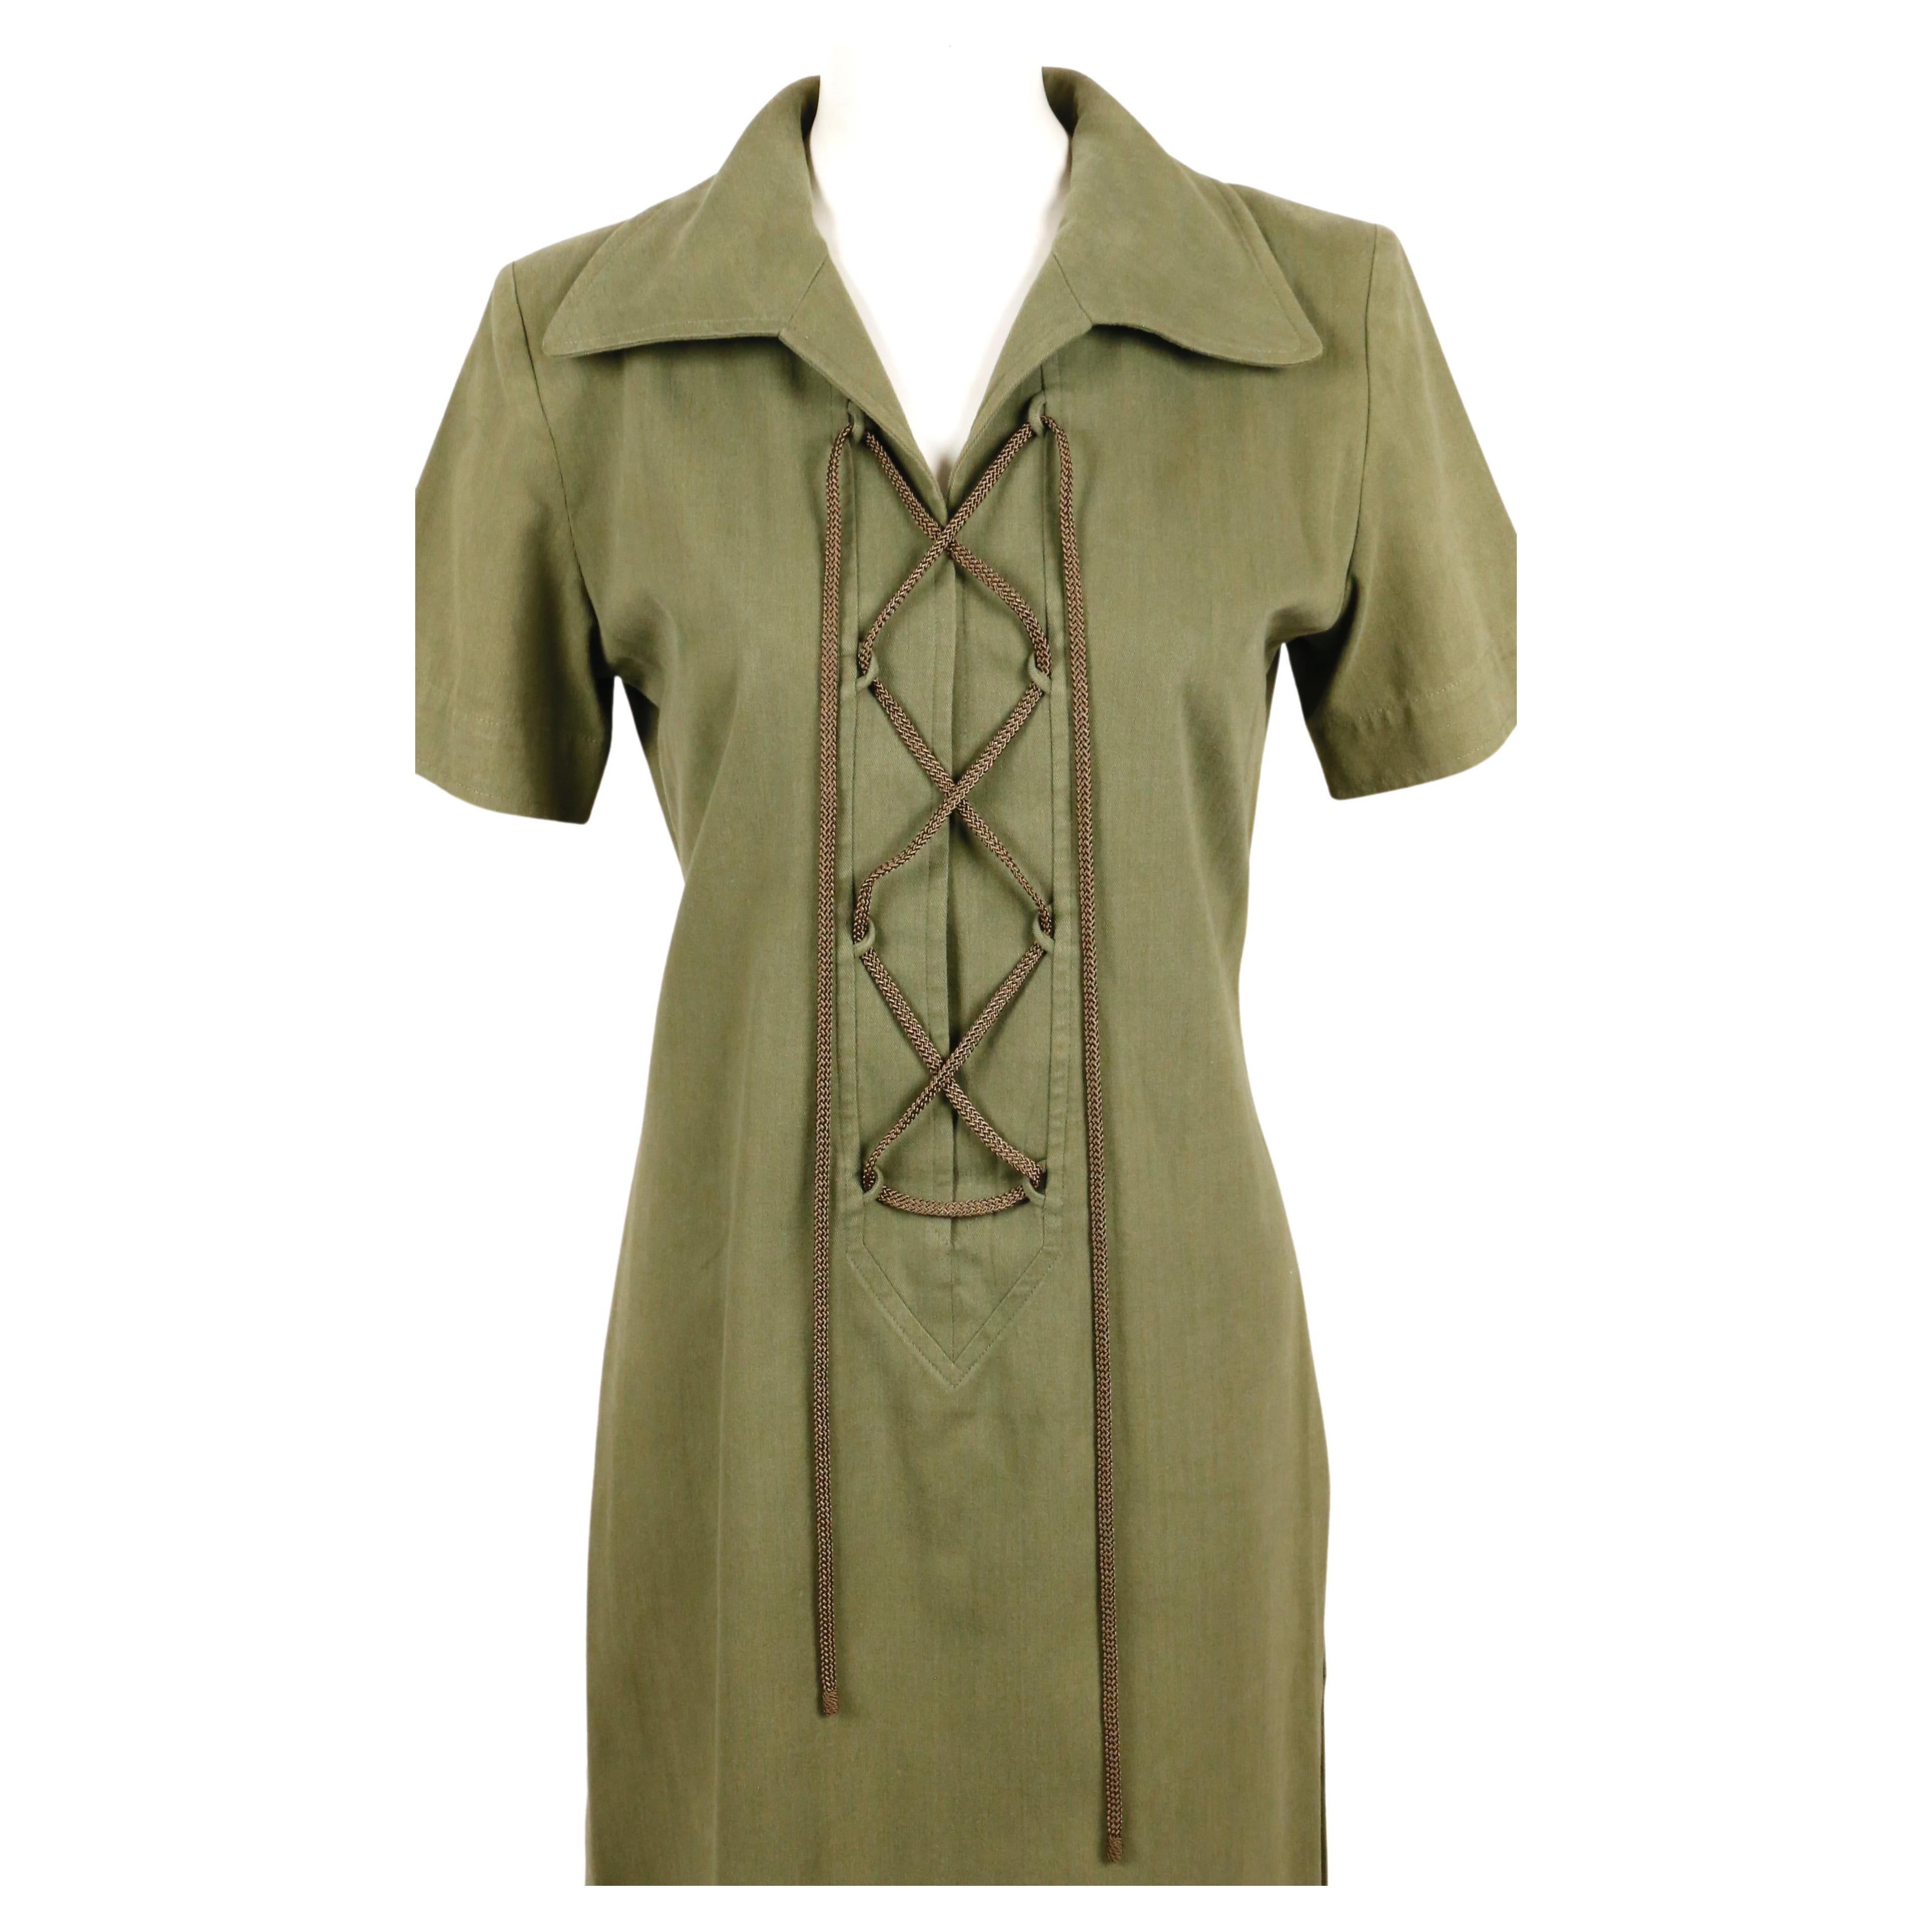 Army-green, cotton safari dress with lace up front and thigh slit designed by Yves Saint Laurent dating to the 1990's. No size is indicated however this fits a S or M (French 38). Approximate measurements: shoulder 15.5